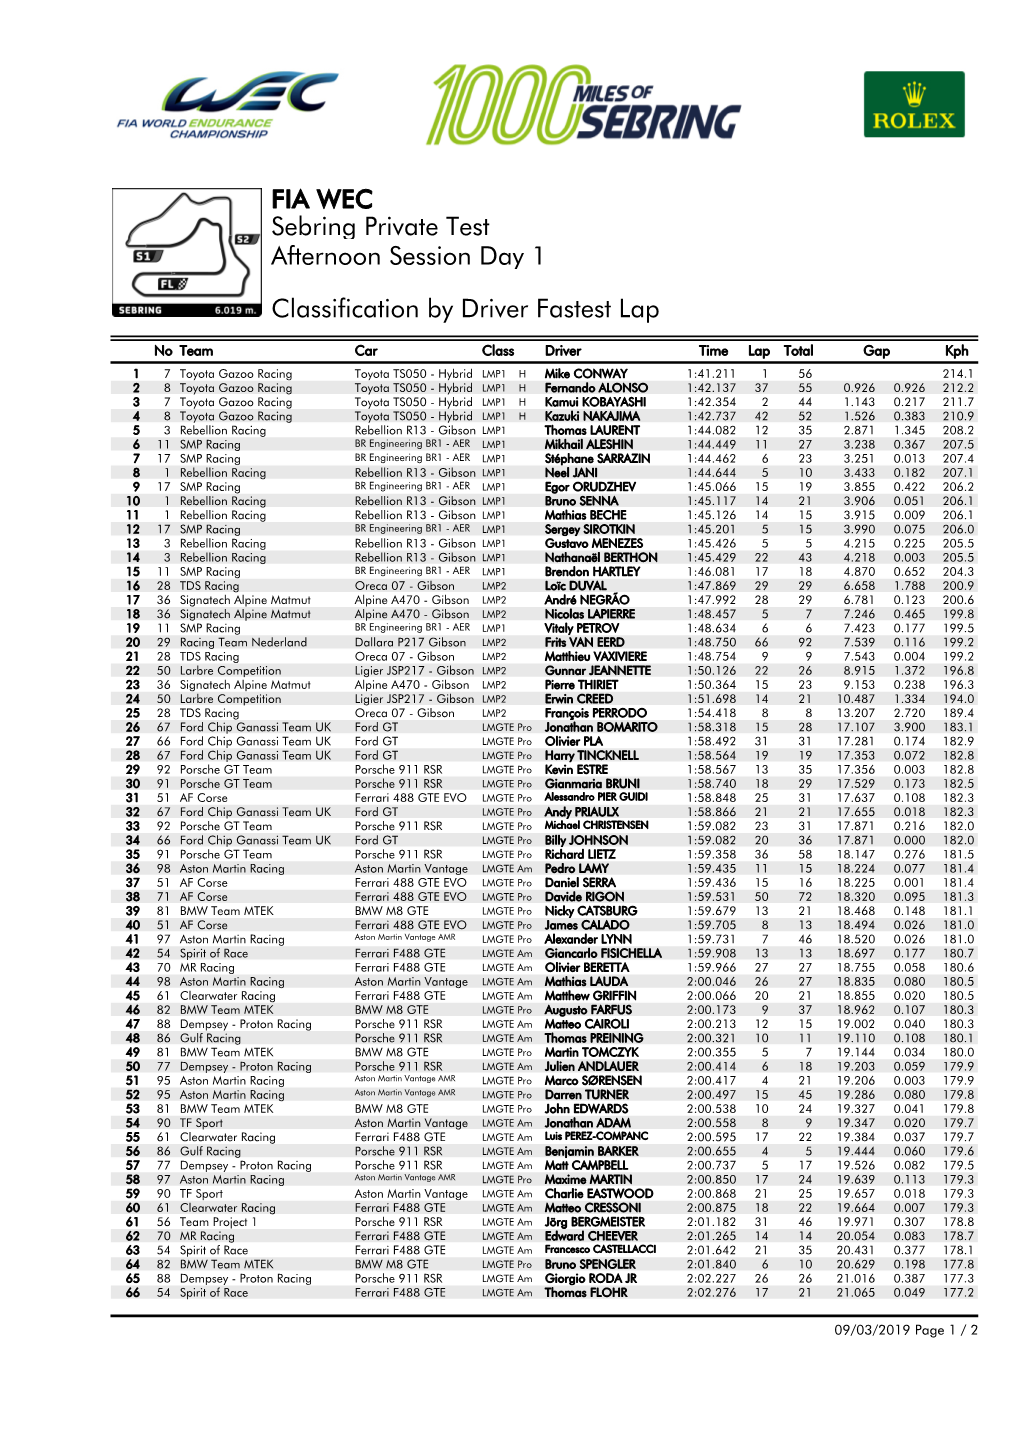 Classification by Driver Fastest Lap Afternoon Session Day 1 Sebring